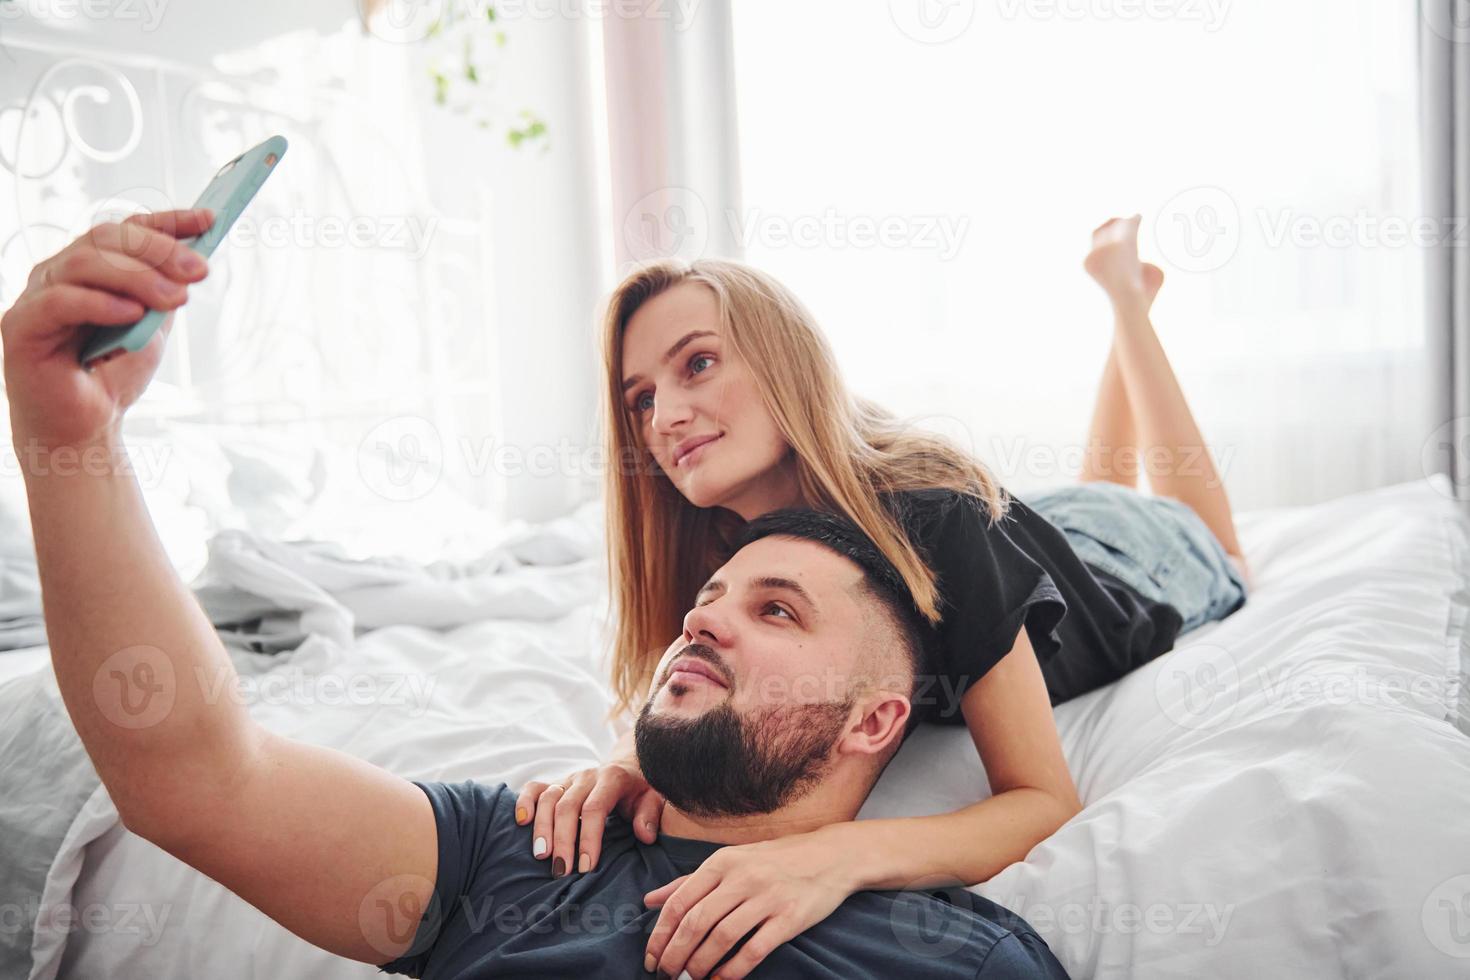 Young married couple making a selfie by using phone in bedroom at daytime photo